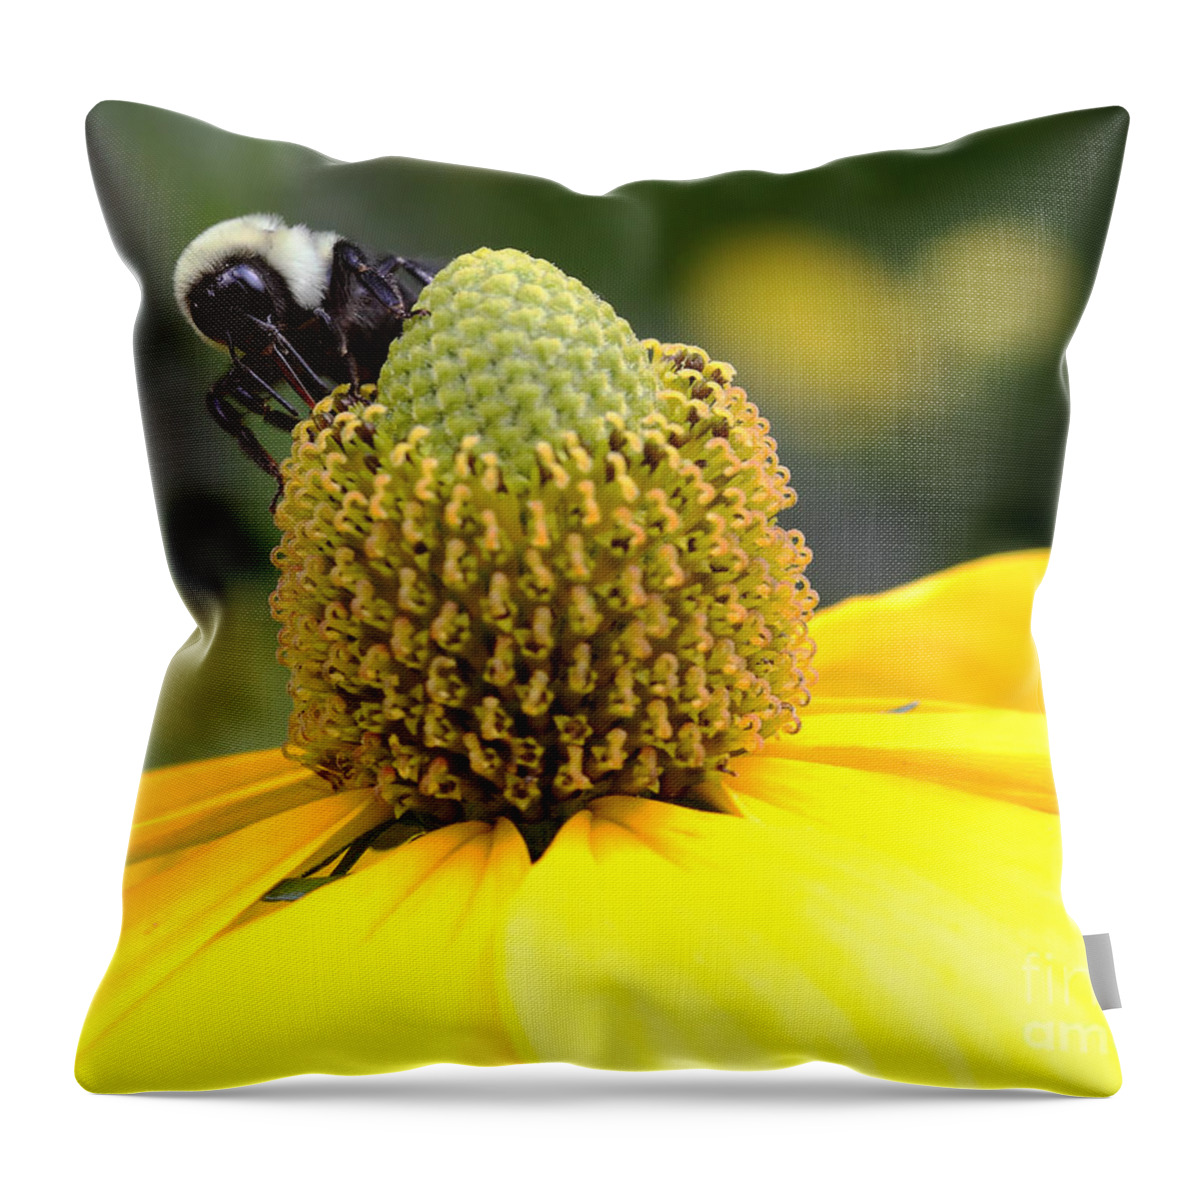 Pollination Throw Pillow featuring the photograph Pollination by Rick Kuperberg Sr